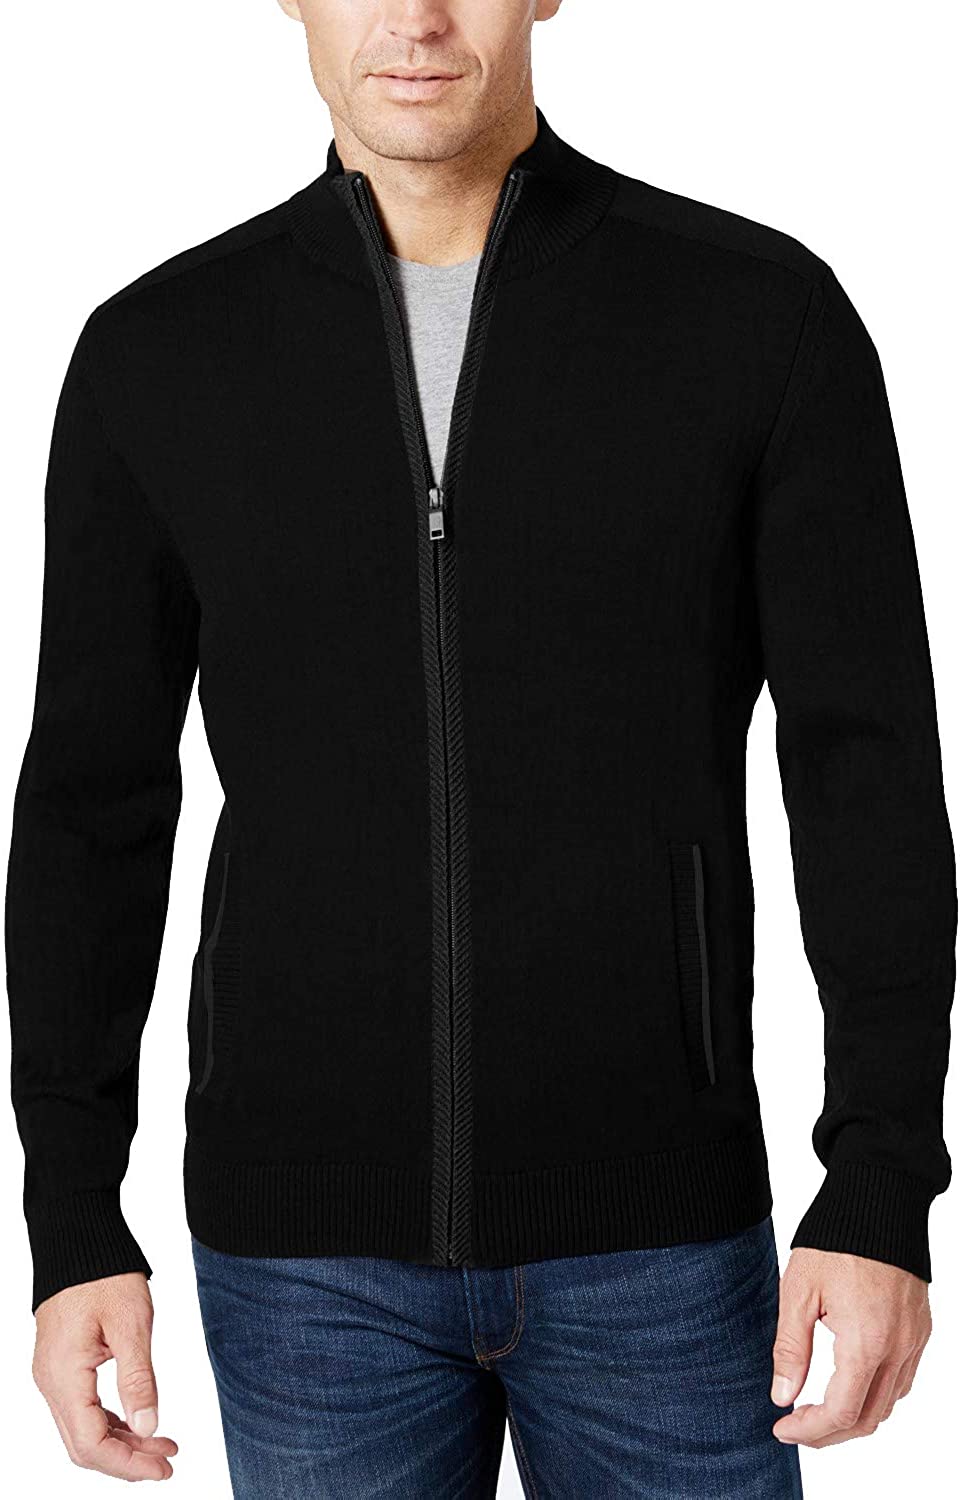 COOFANDY Men's Full Zip Cardigan Sweater Slim Fit Stand Collar Cotton Cable Knitted Sweater Jacket with Pockets 